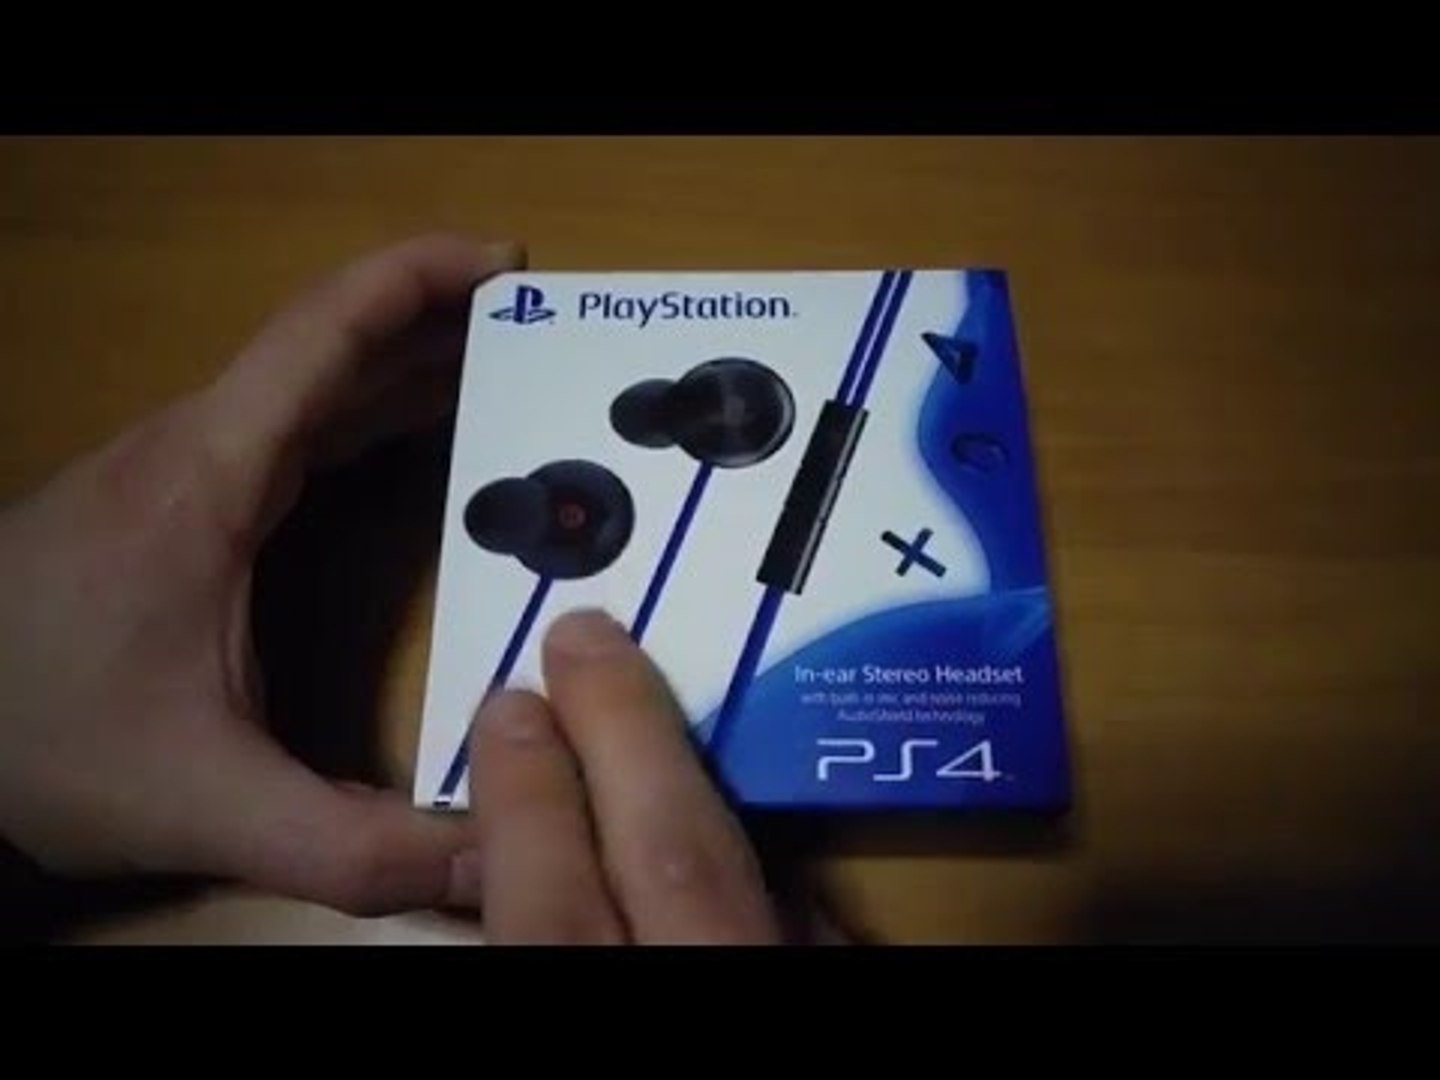 Unboxing Ps4 In-ear Stereo Headset - Cuffie auricolari ufficiali Sony Ps4 -  Video Dailymotion